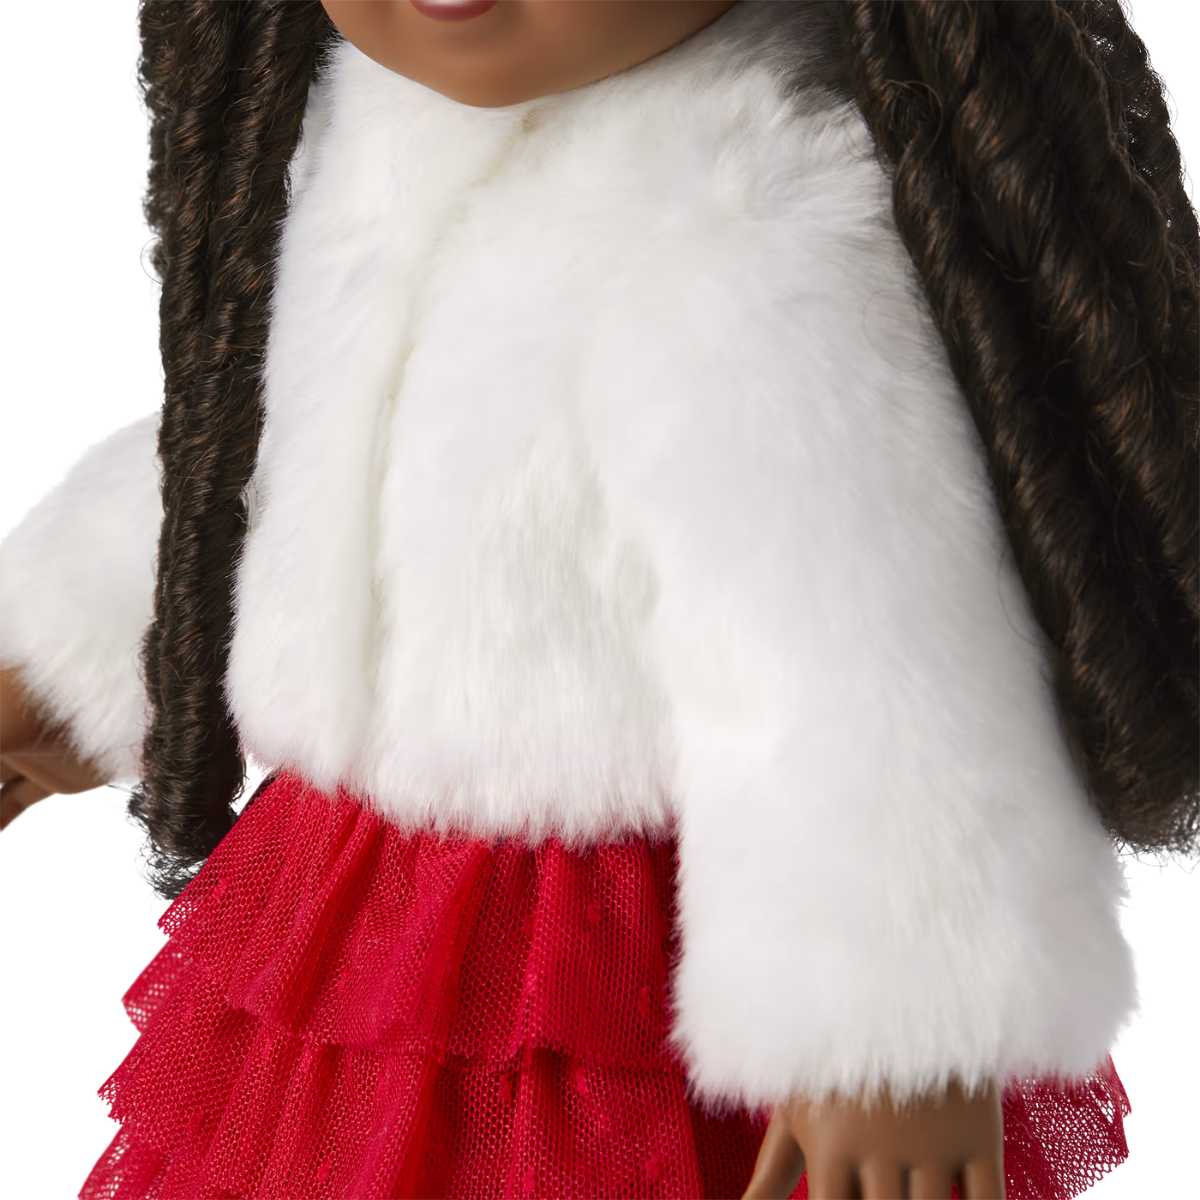 American Girl x Janie and Jack Soft as Snow Fur Jacket for 18-inch Dolls - Simon's Collectibles